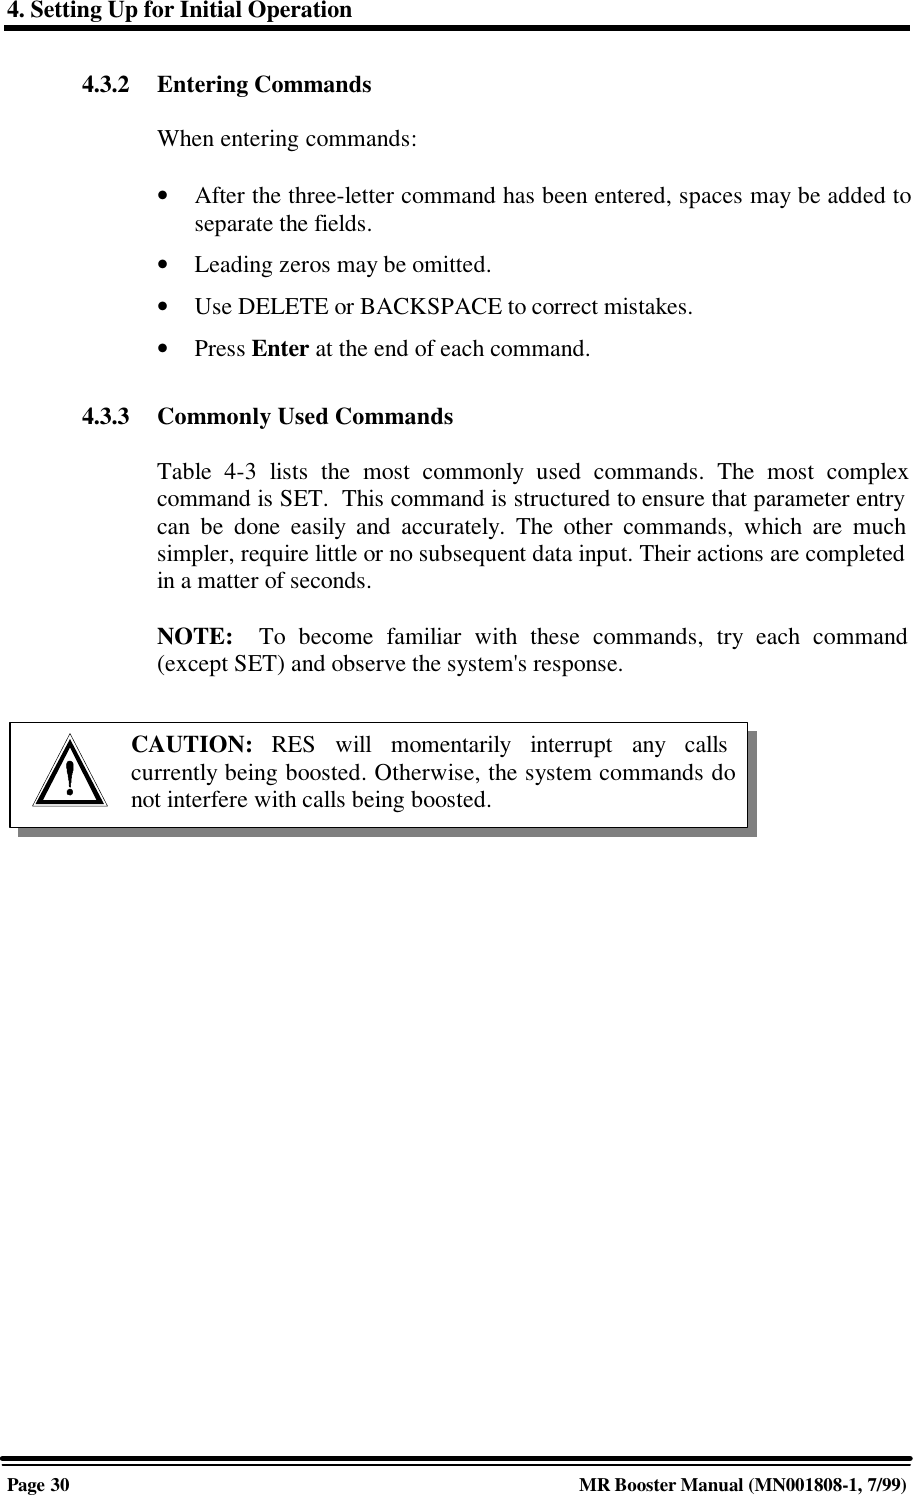 4. Setting Up for Initial OperationPage 30 MR Booster Manual (MN001808-1, 7/99)4.3.2 Entering CommandsWhen entering commands:• After the three-letter command has been entered, spaces may be added toseparate the fields.• Leading zeros may be omitted.• Use DELETE or BACKSPACE to correct mistakes.• Press Enter at the end of each command.4.3.3 Commonly Used CommandsTable 4-3 lists the most commonly used commands. The most complexcommand is SET.  This command is structured to ensure that parameter entrycan be done easily and accurately. The other commands, which are muchsimpler, require little or no subsequent data input. Their actions are completedin a matter of seconds.NOTE:  To become familiar with these commands, try each command(except SET) and observe the system&apos;s response.CAUTION:  RES will momentarily interrupt any callscurrently being boosted. Otherwise, the system commands donot interfere with calls being boosted.